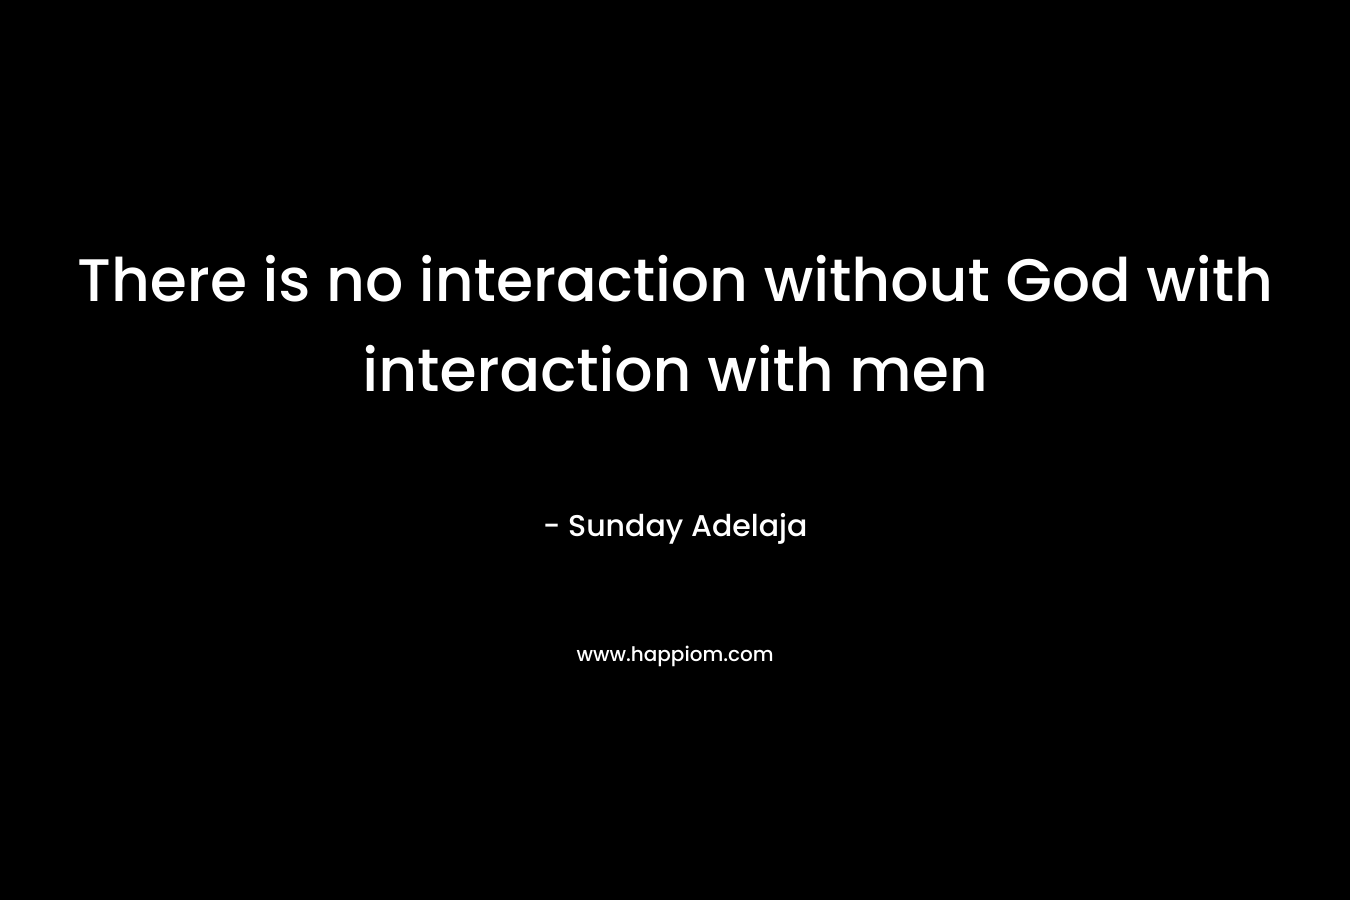 There is no interaction without God with interaction with men